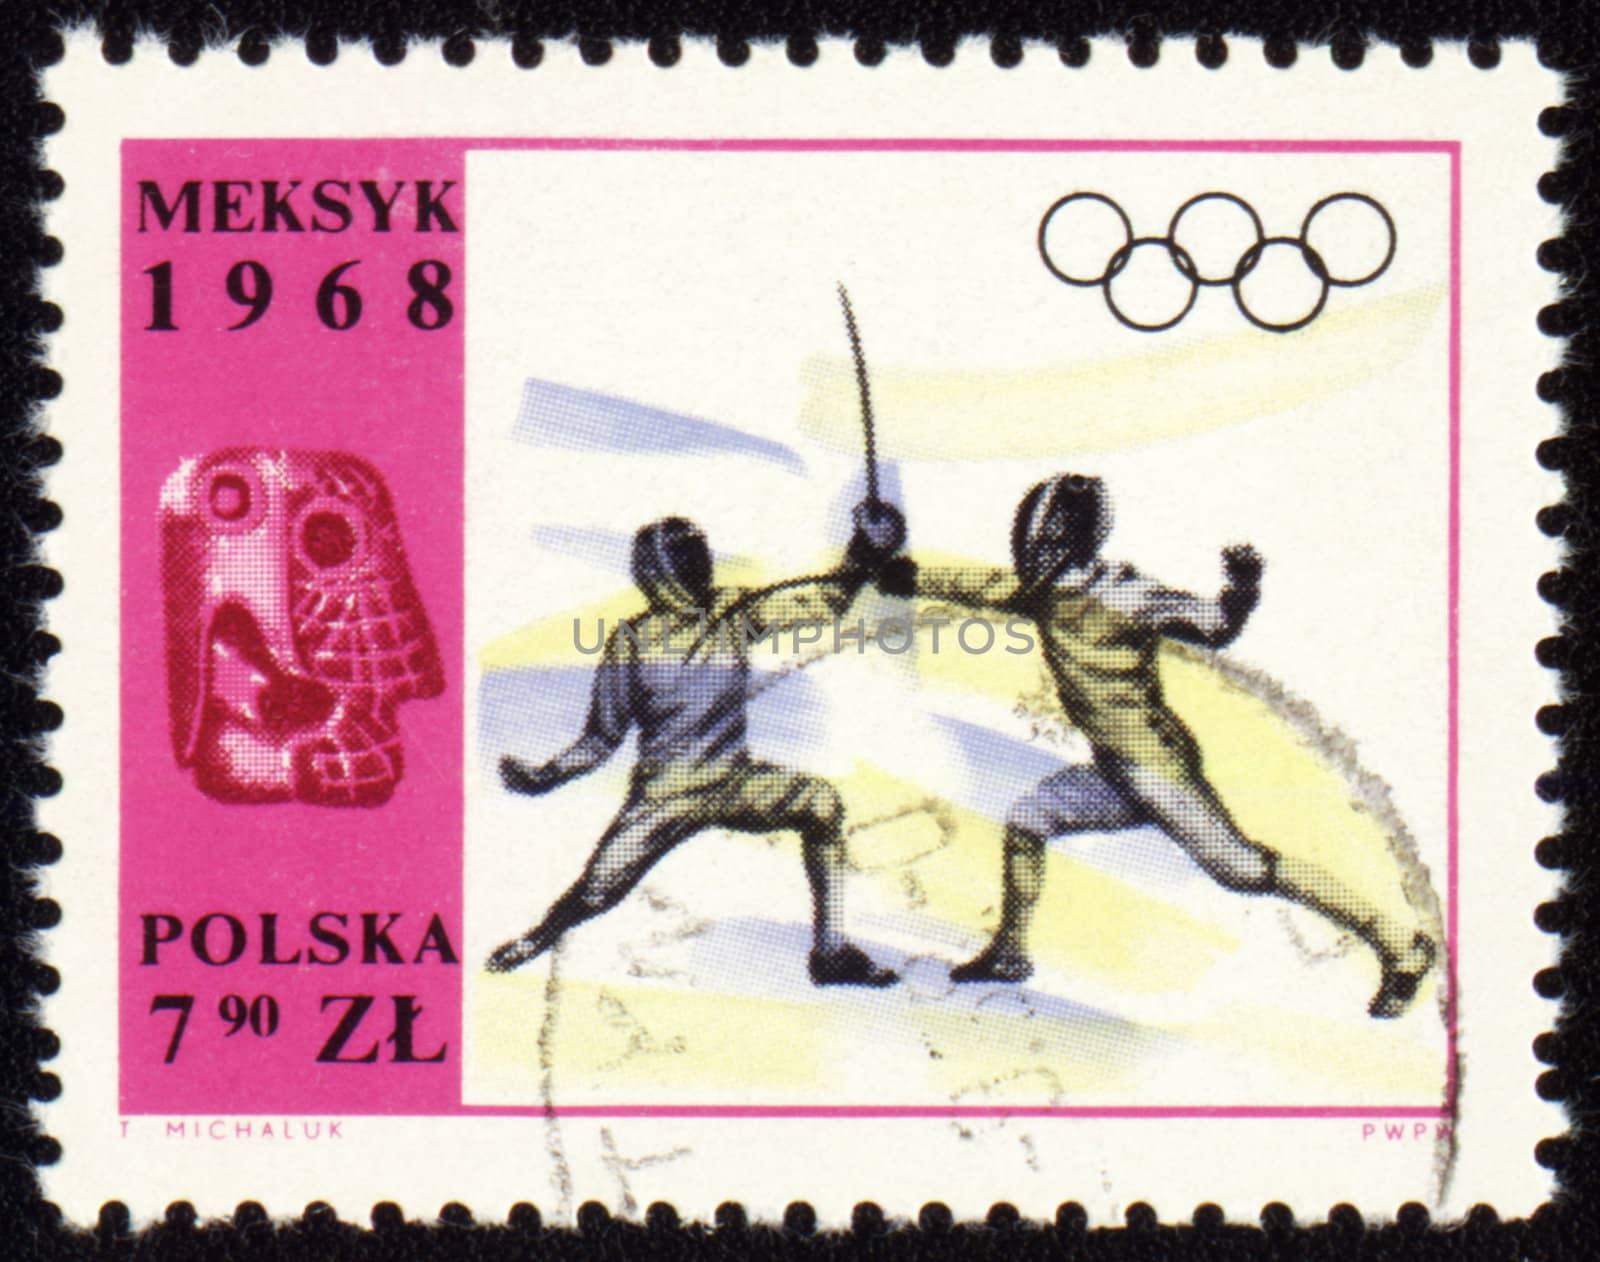 POLAND - CIRCA 1968: A post stamp printed in Poland shows fencing, devoted to Olympic games in Mexico, series, circa 1968